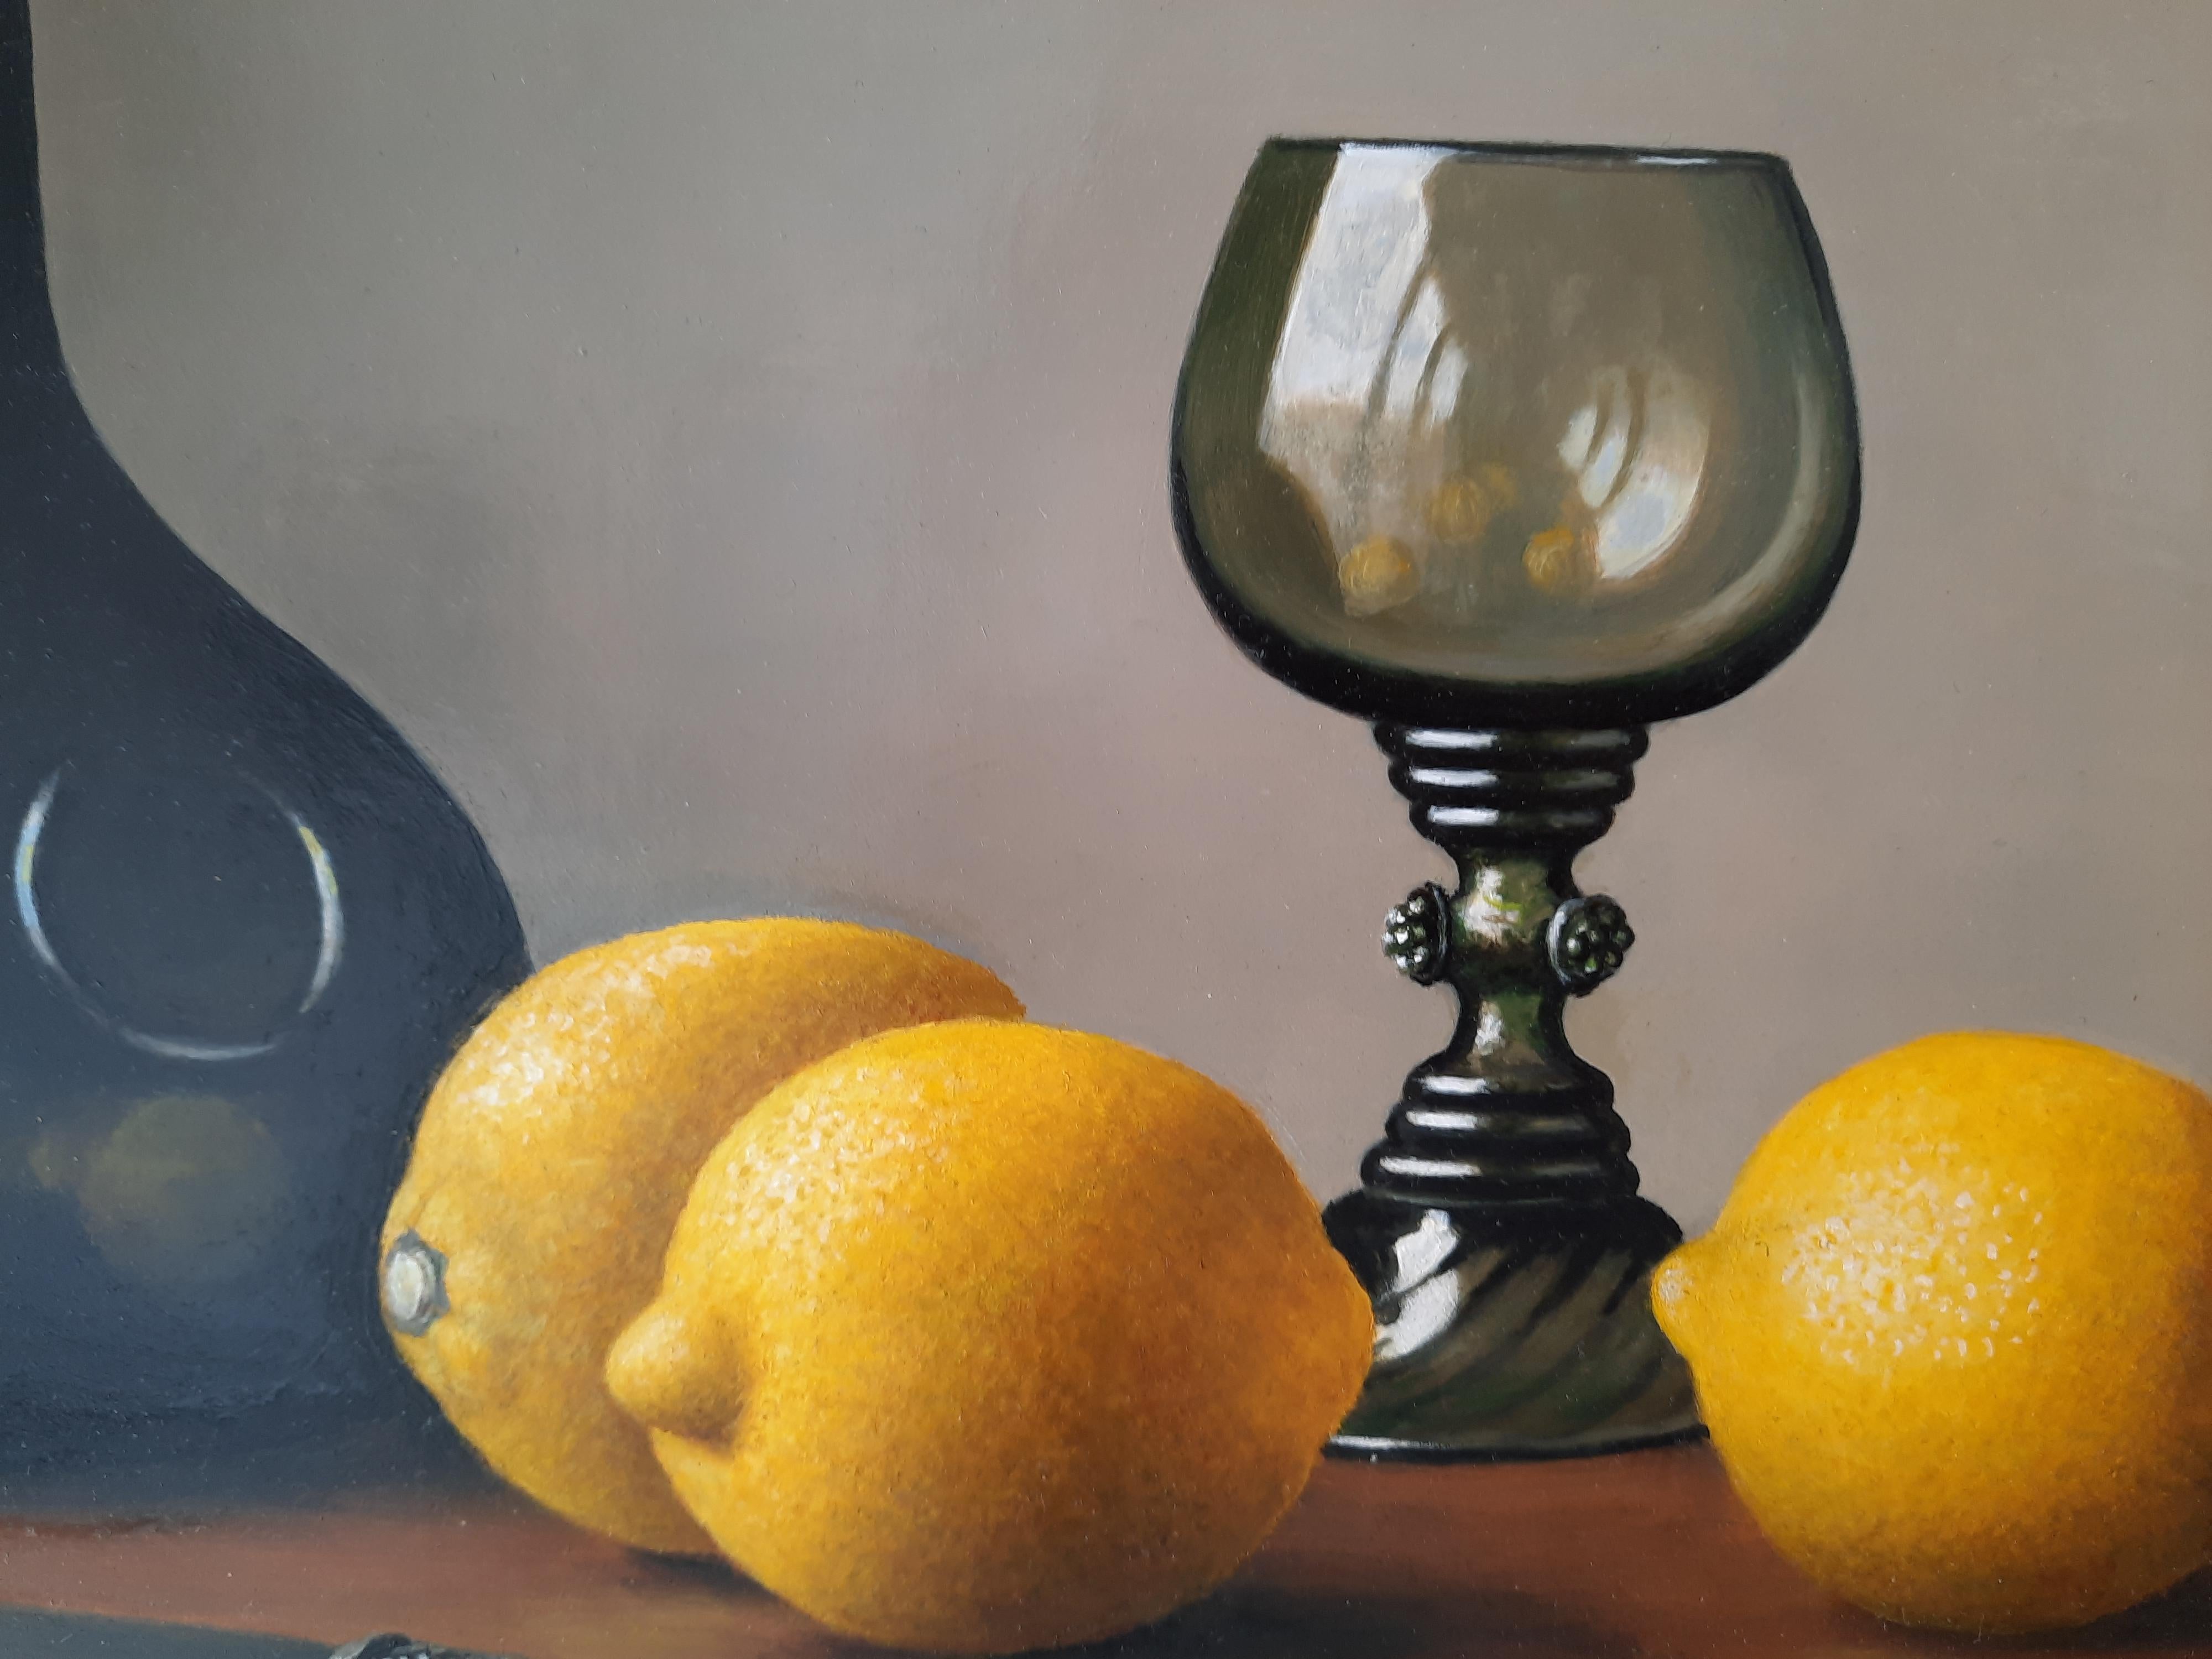 still life with wine glass and cut lemon